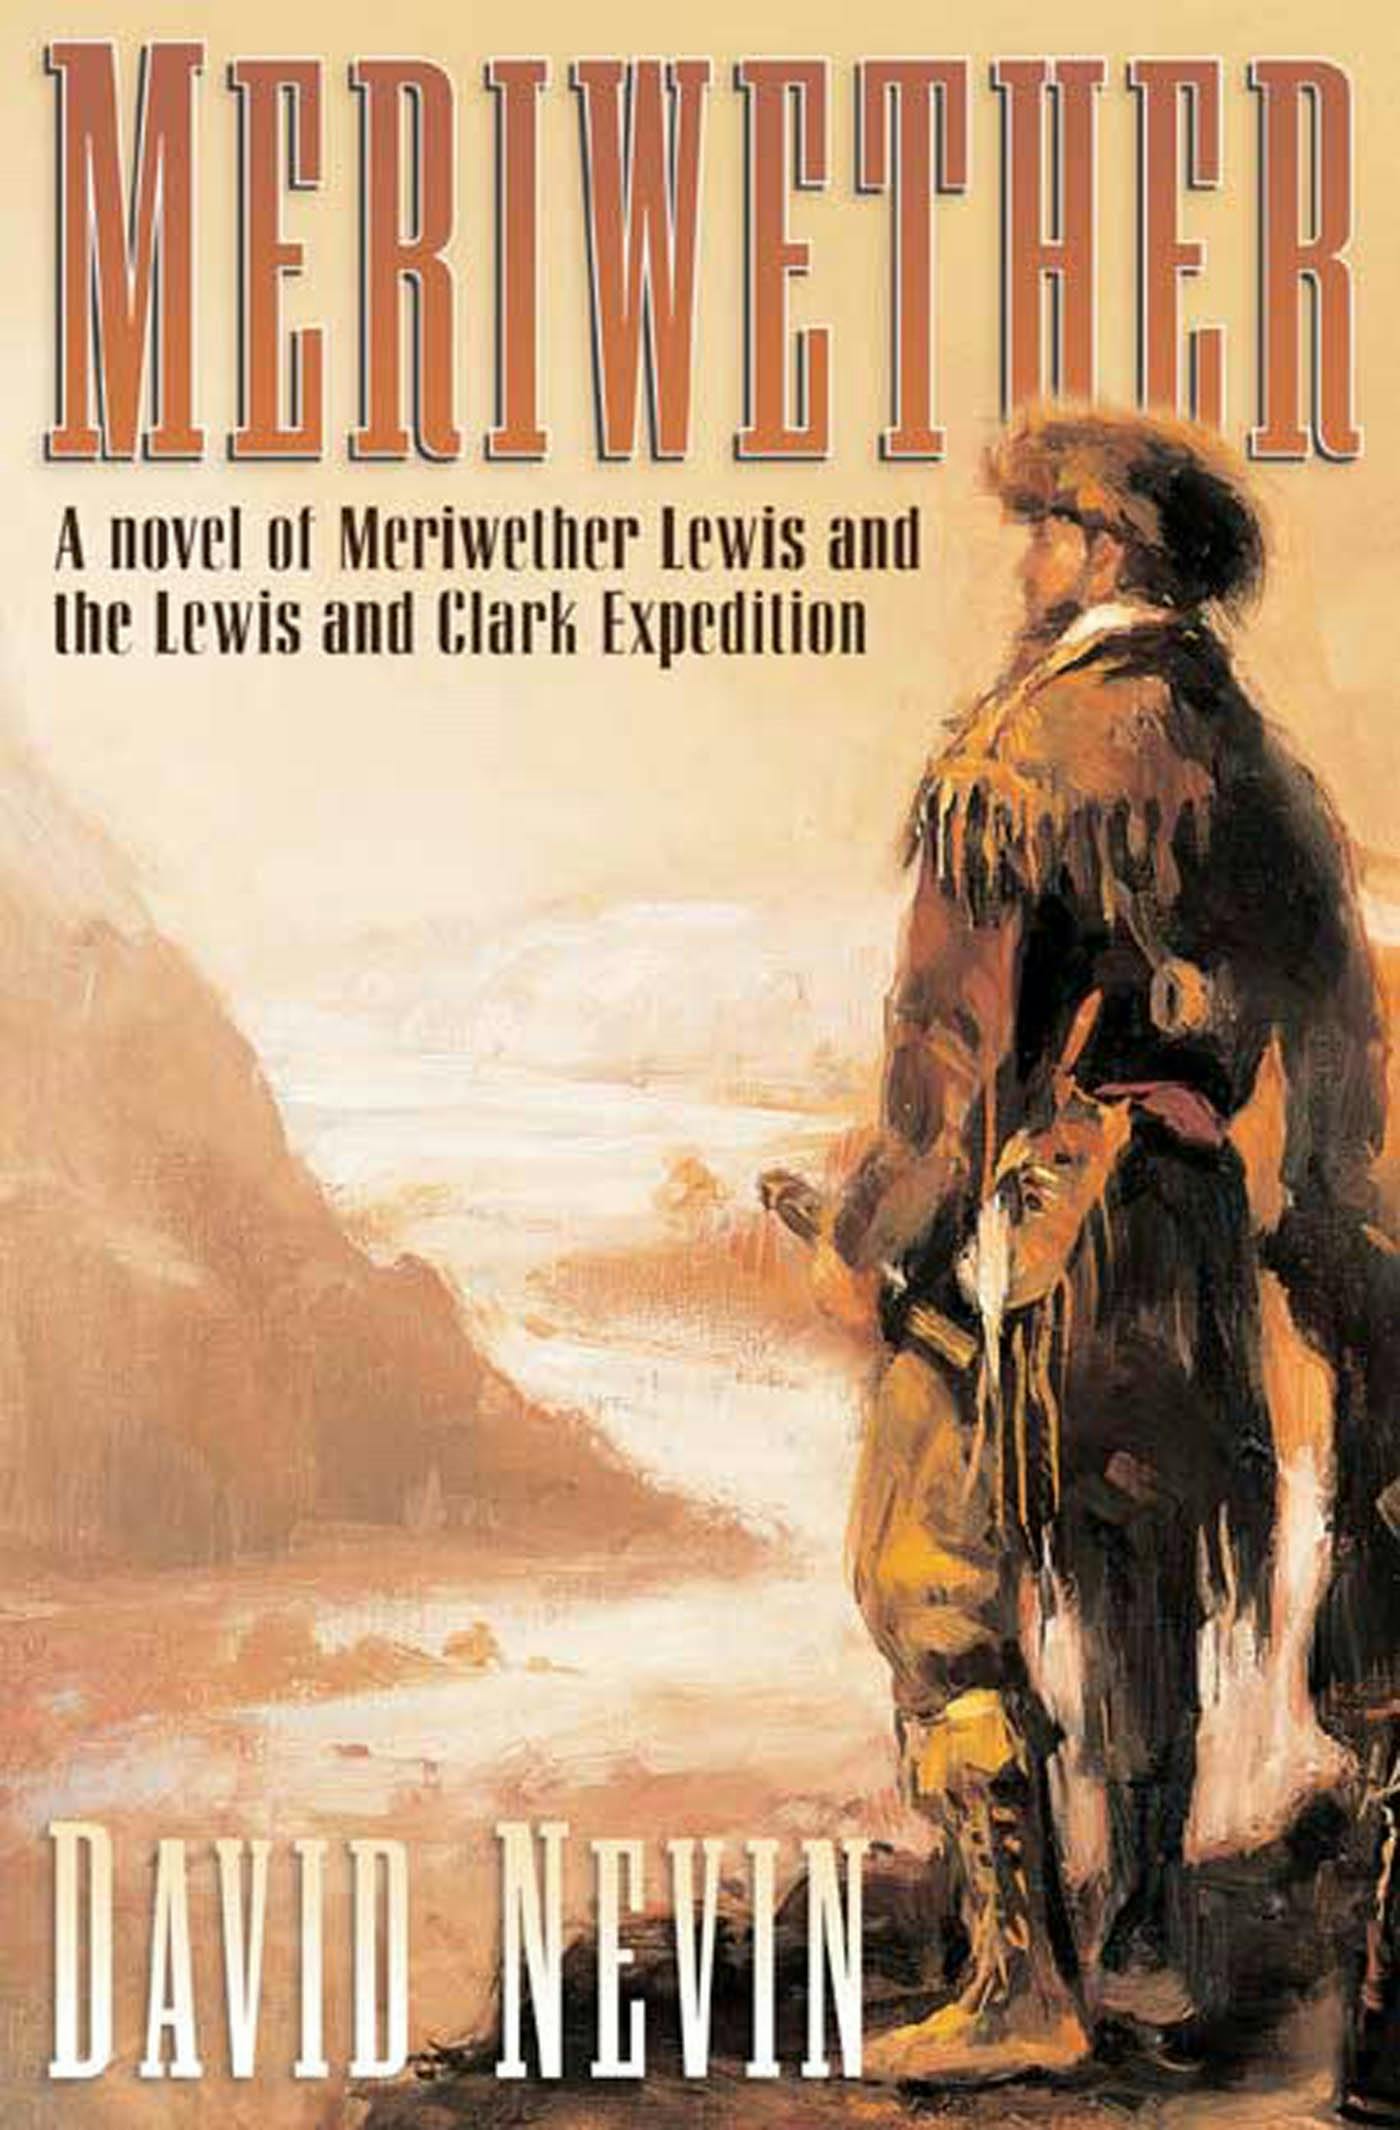 Cover for the book titled as: Meriwether